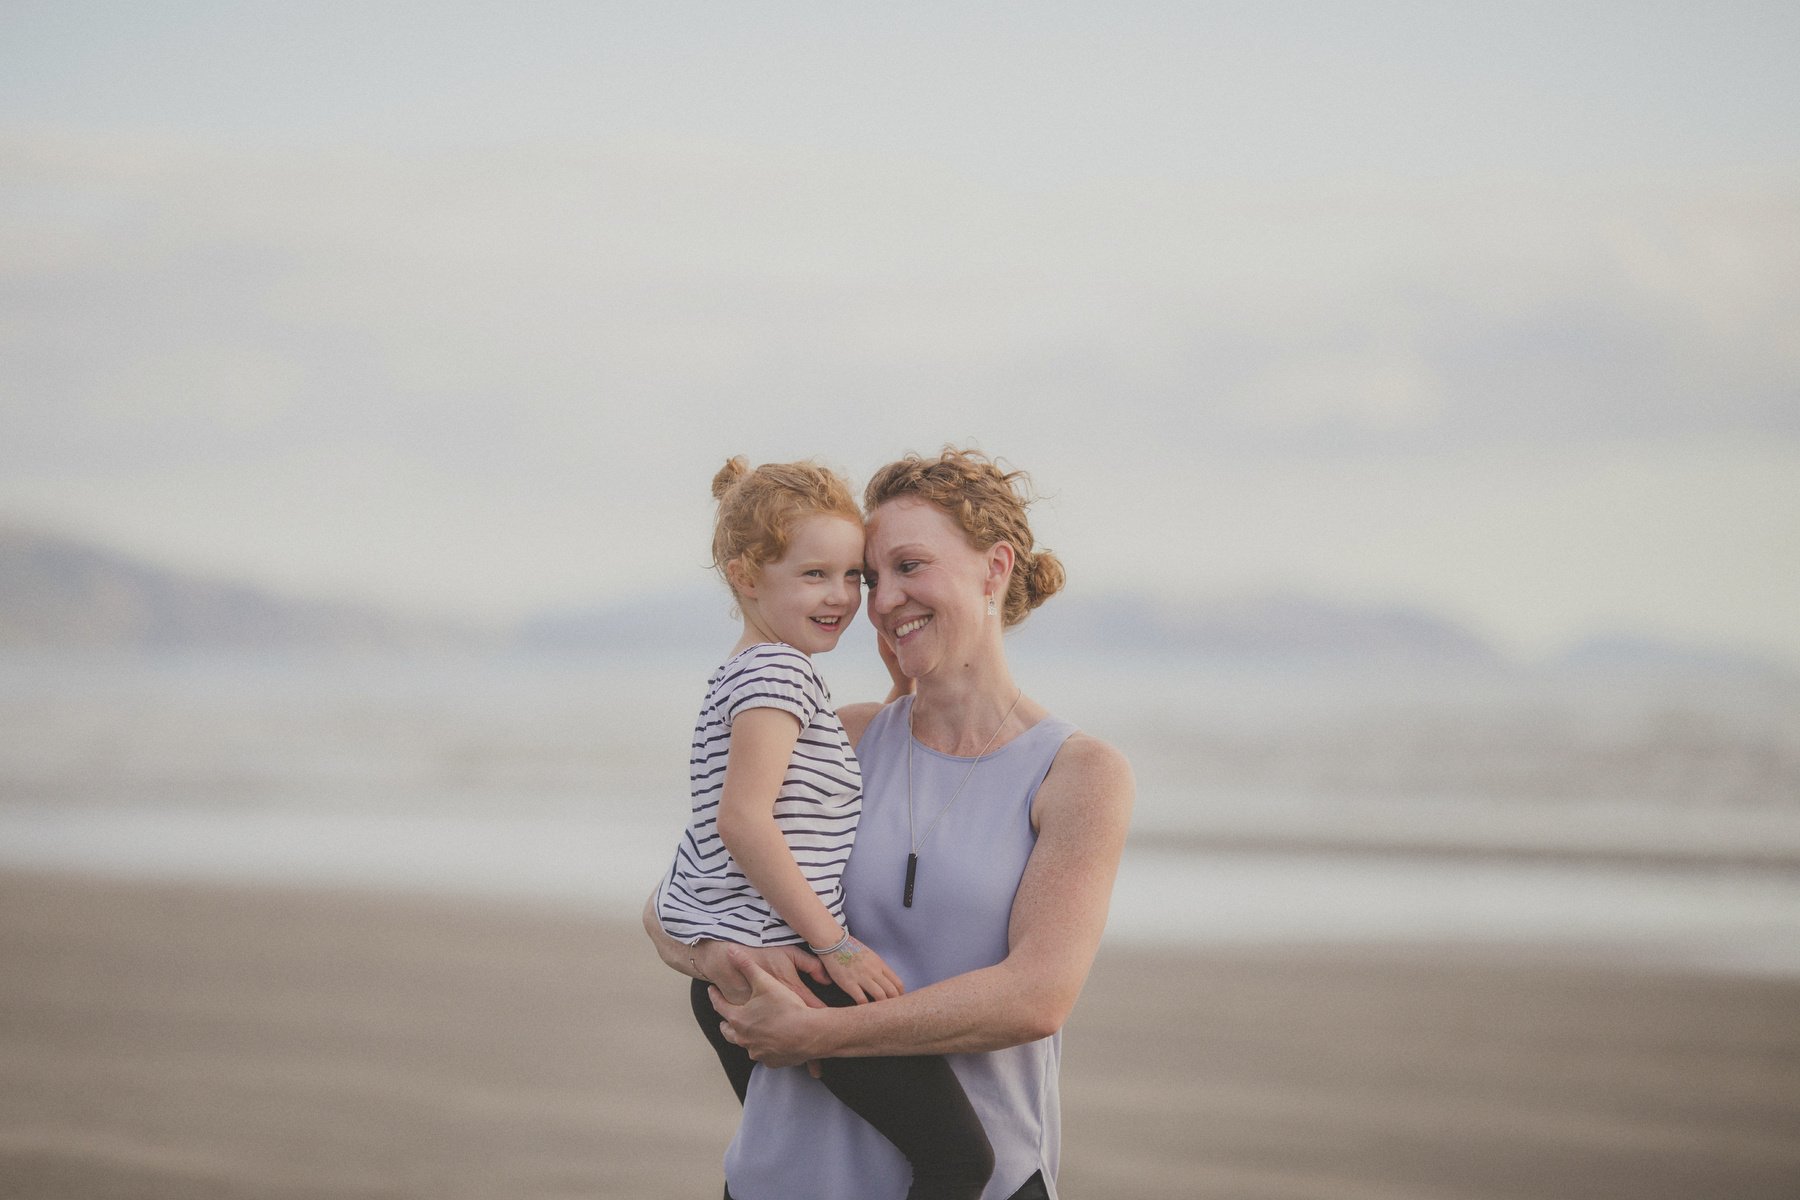  Natural and un-posed family portraits by Jenny Siaosi Photography, in Wellington, NZ.  